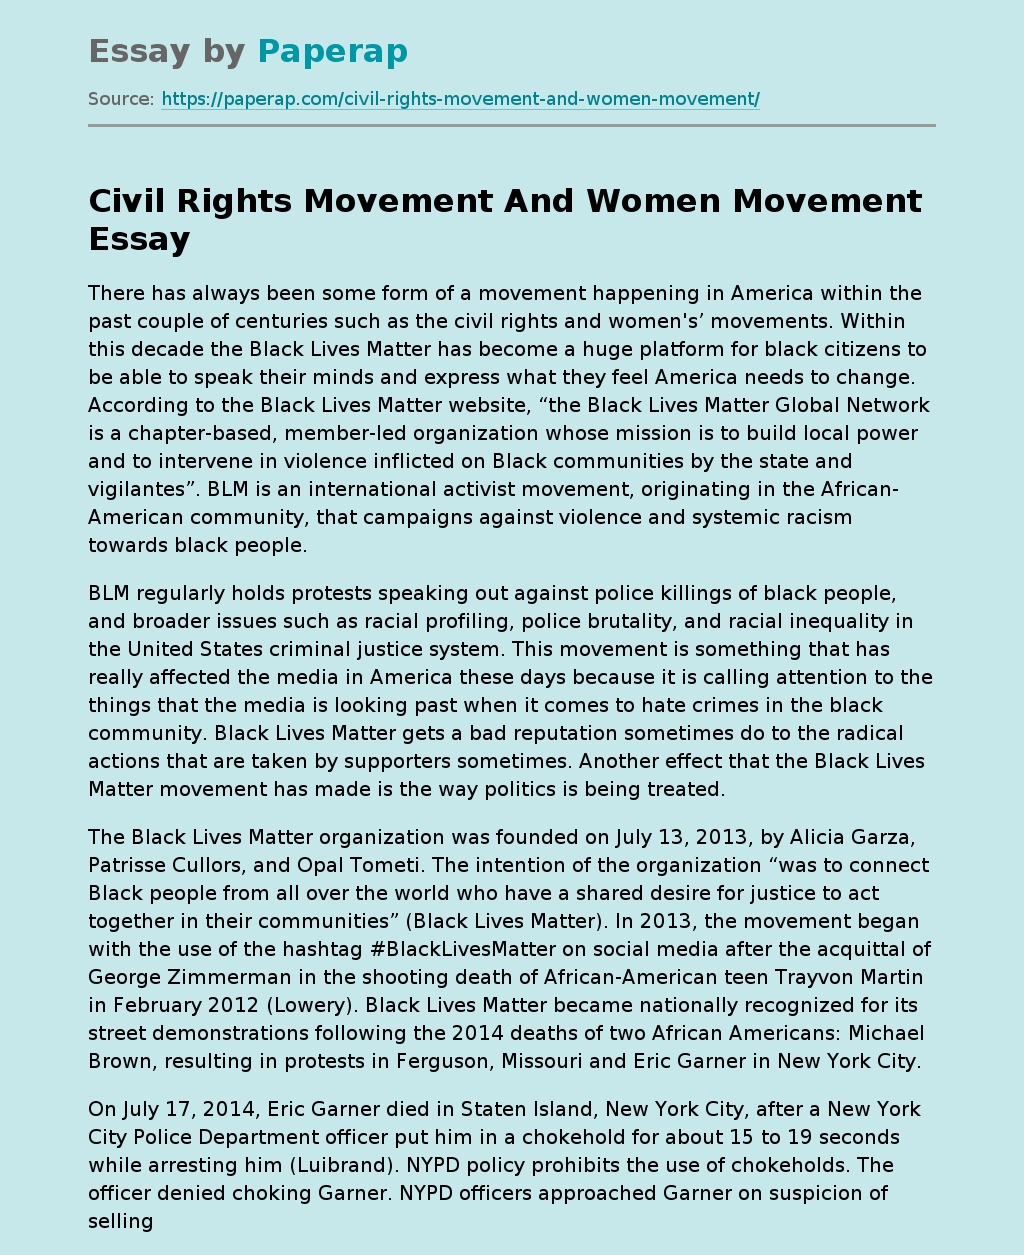 Civil Rights Movement And Women Movement